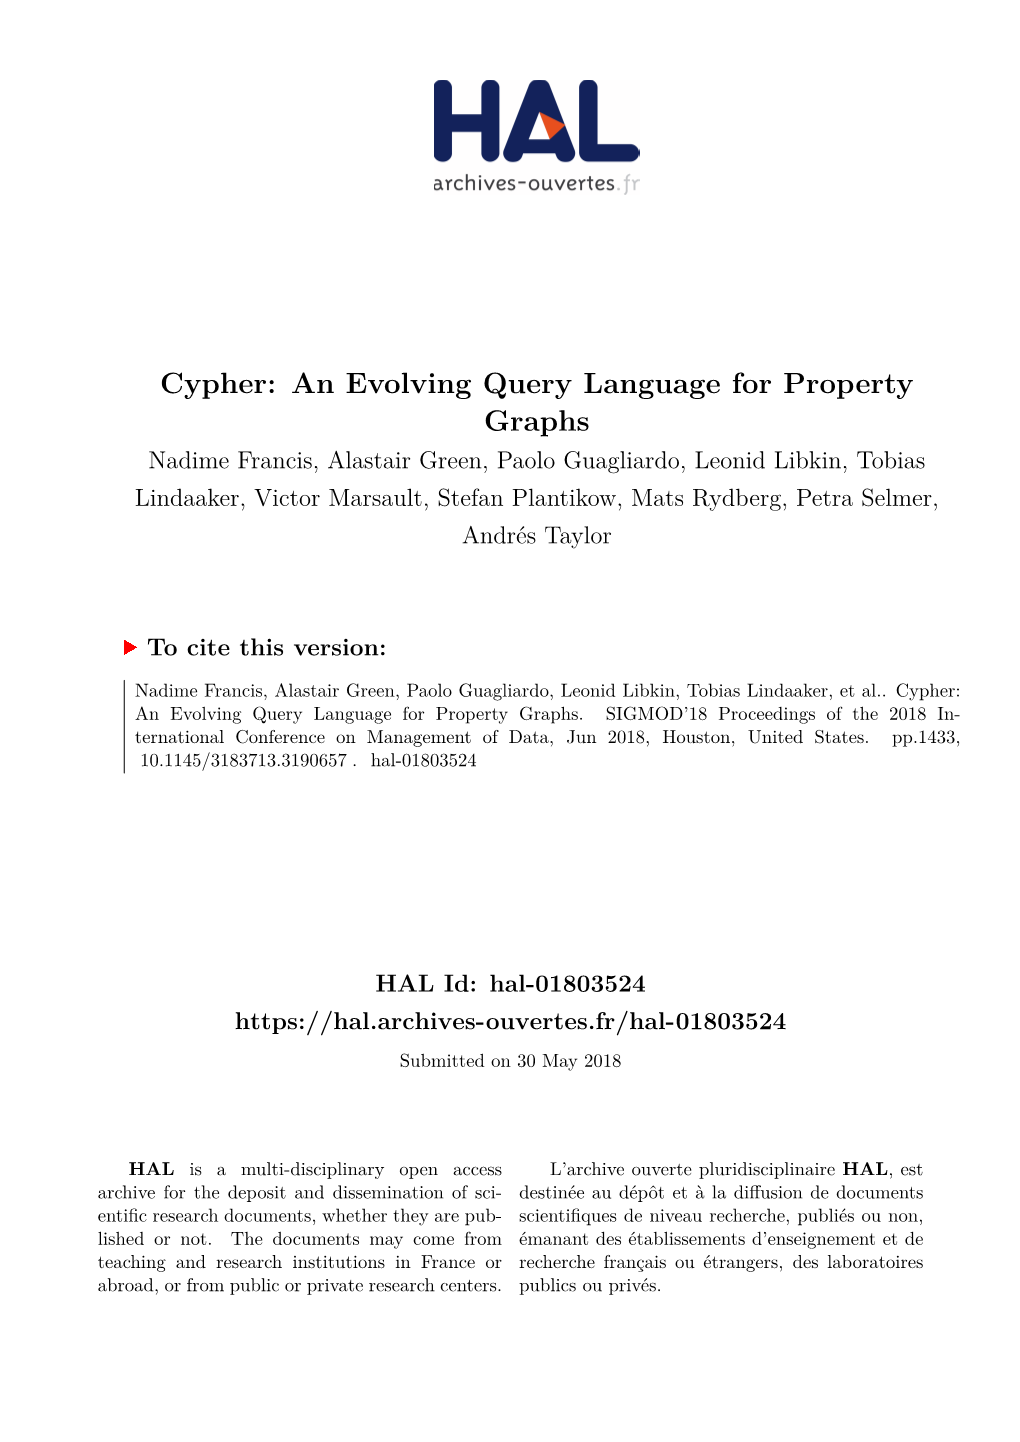 Cypher: an Evolving Query Language for Property Graphs